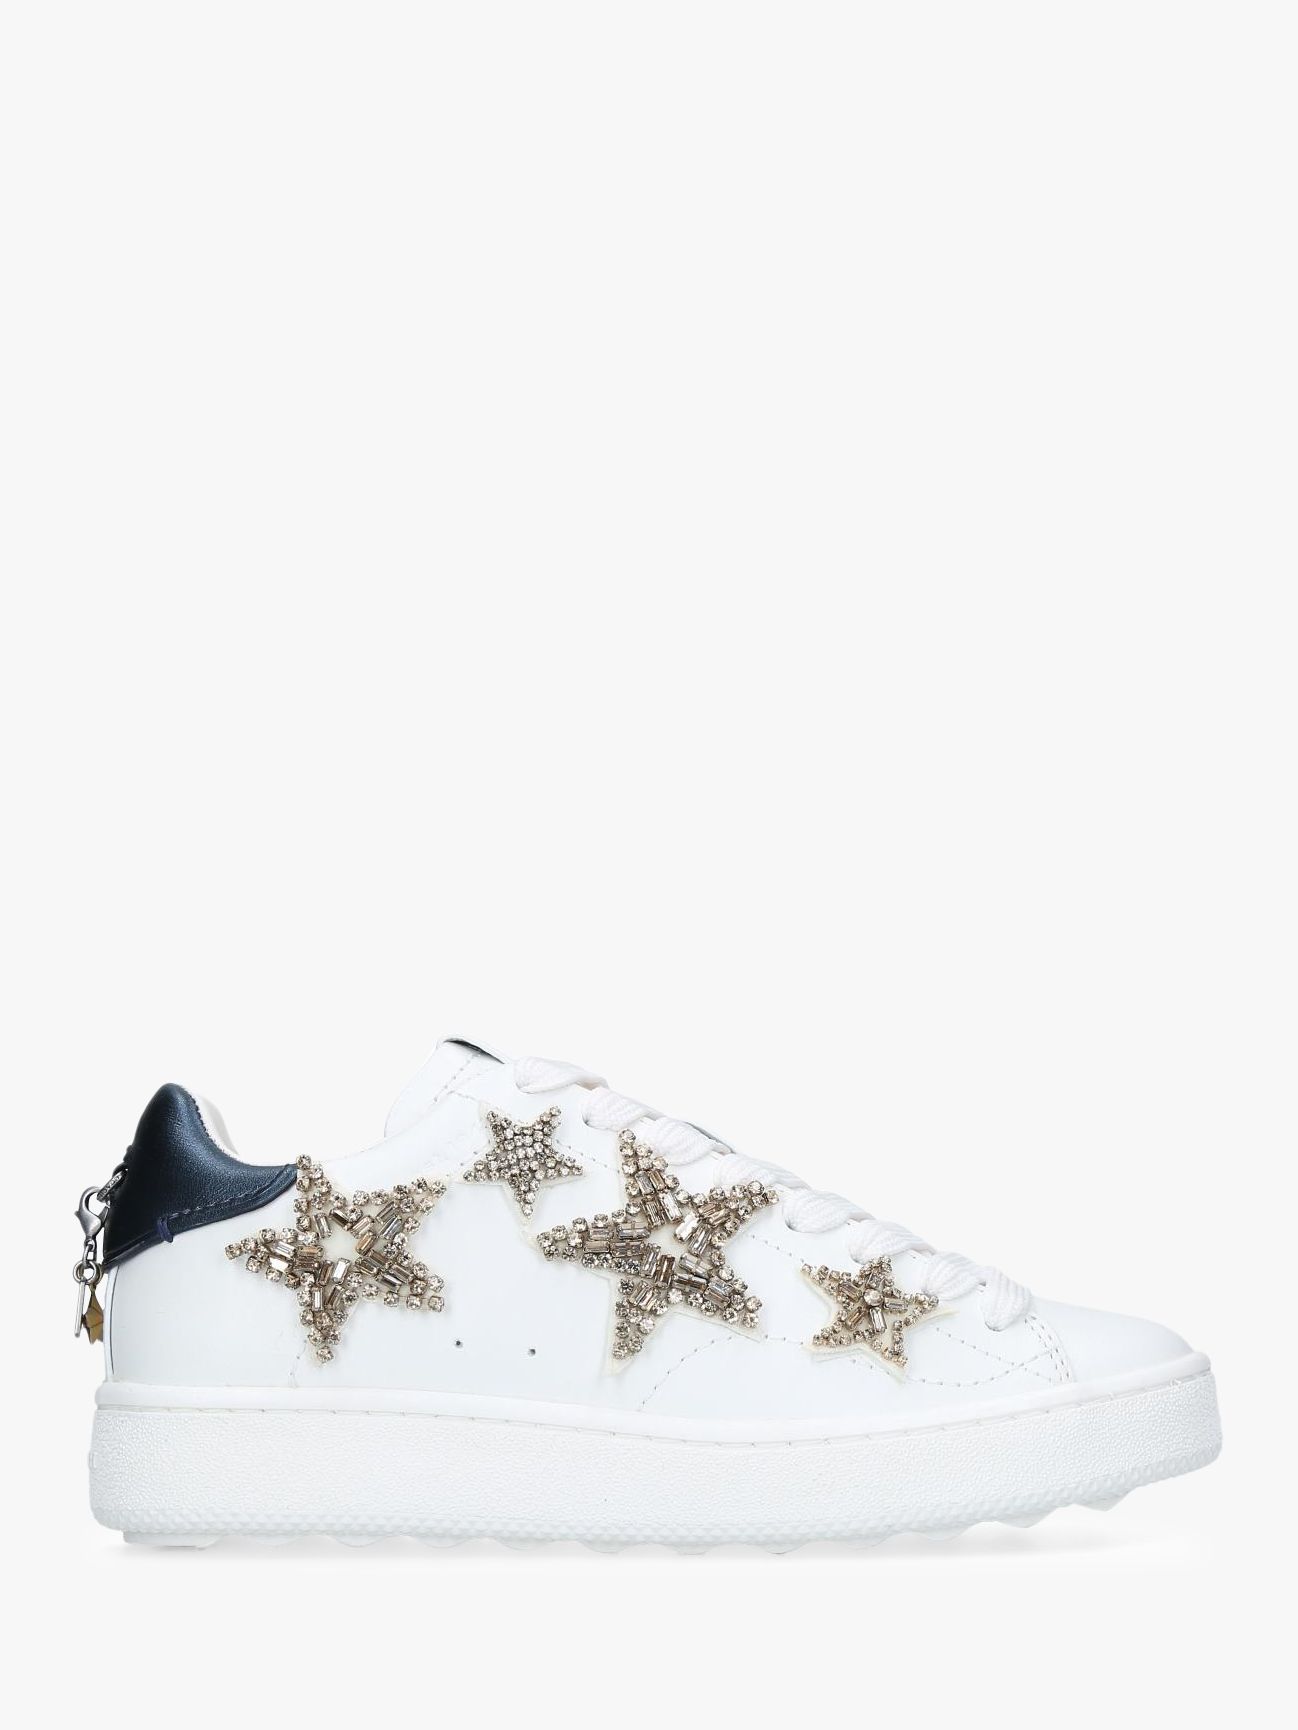 Coach C101 Star Lace Up Trainers, White